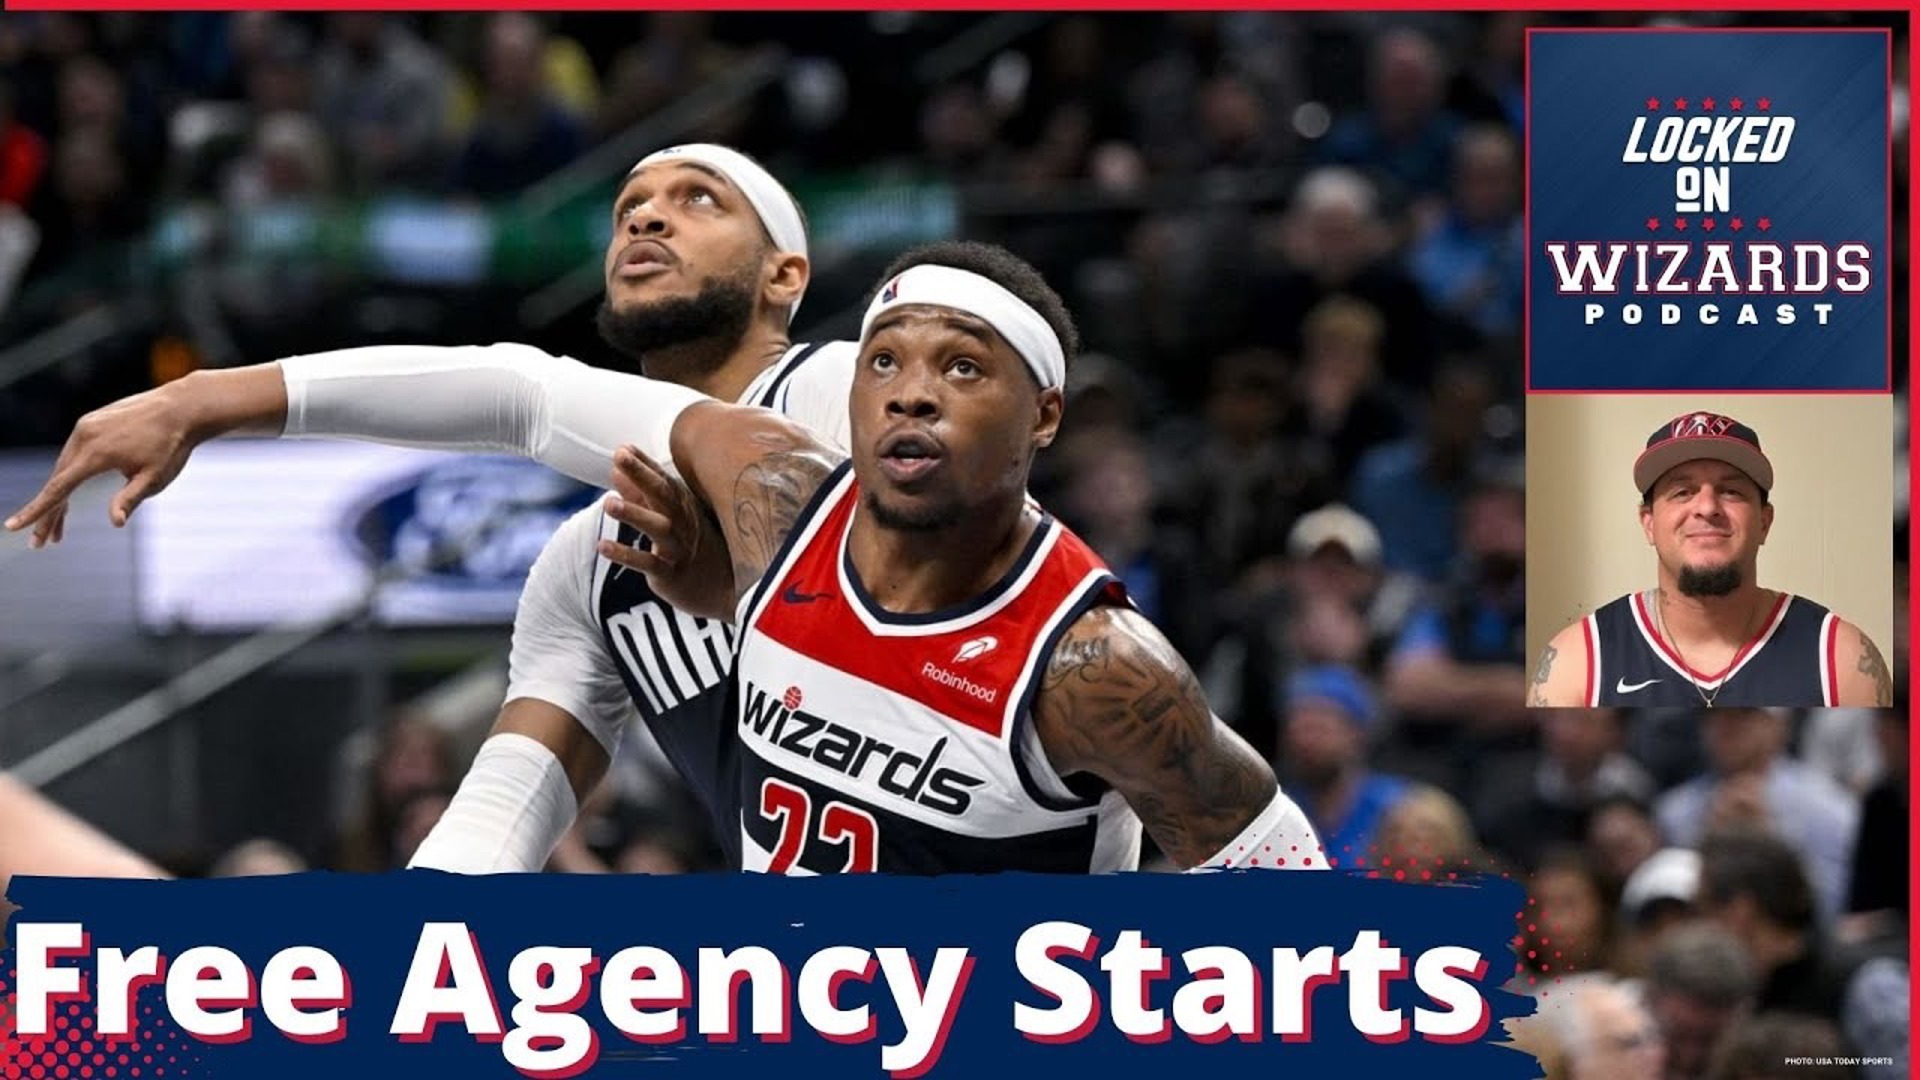 Brandon responds to roster moves made by the Wizards in the early stages of the Free Agency period.